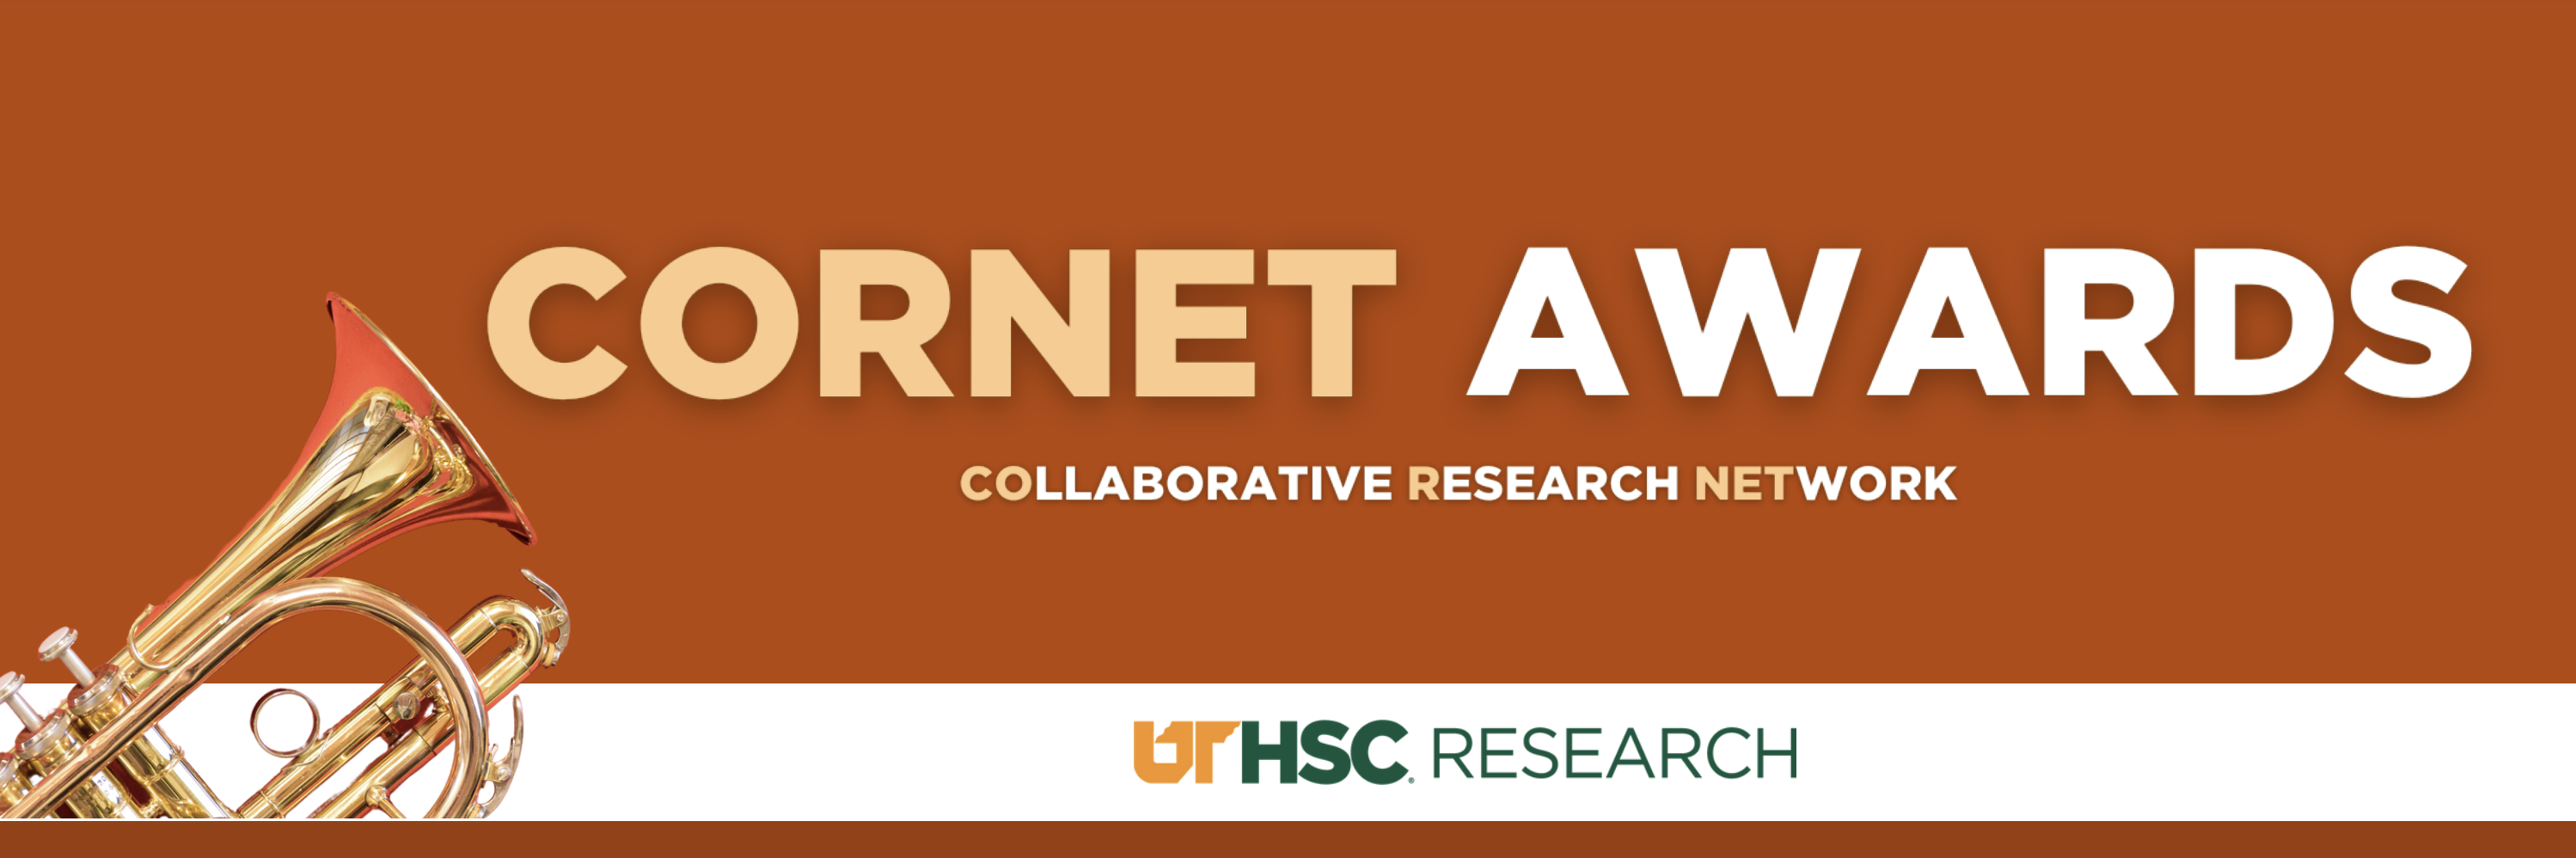 Office of Research CORNET Awards (Collaborative Research Network)